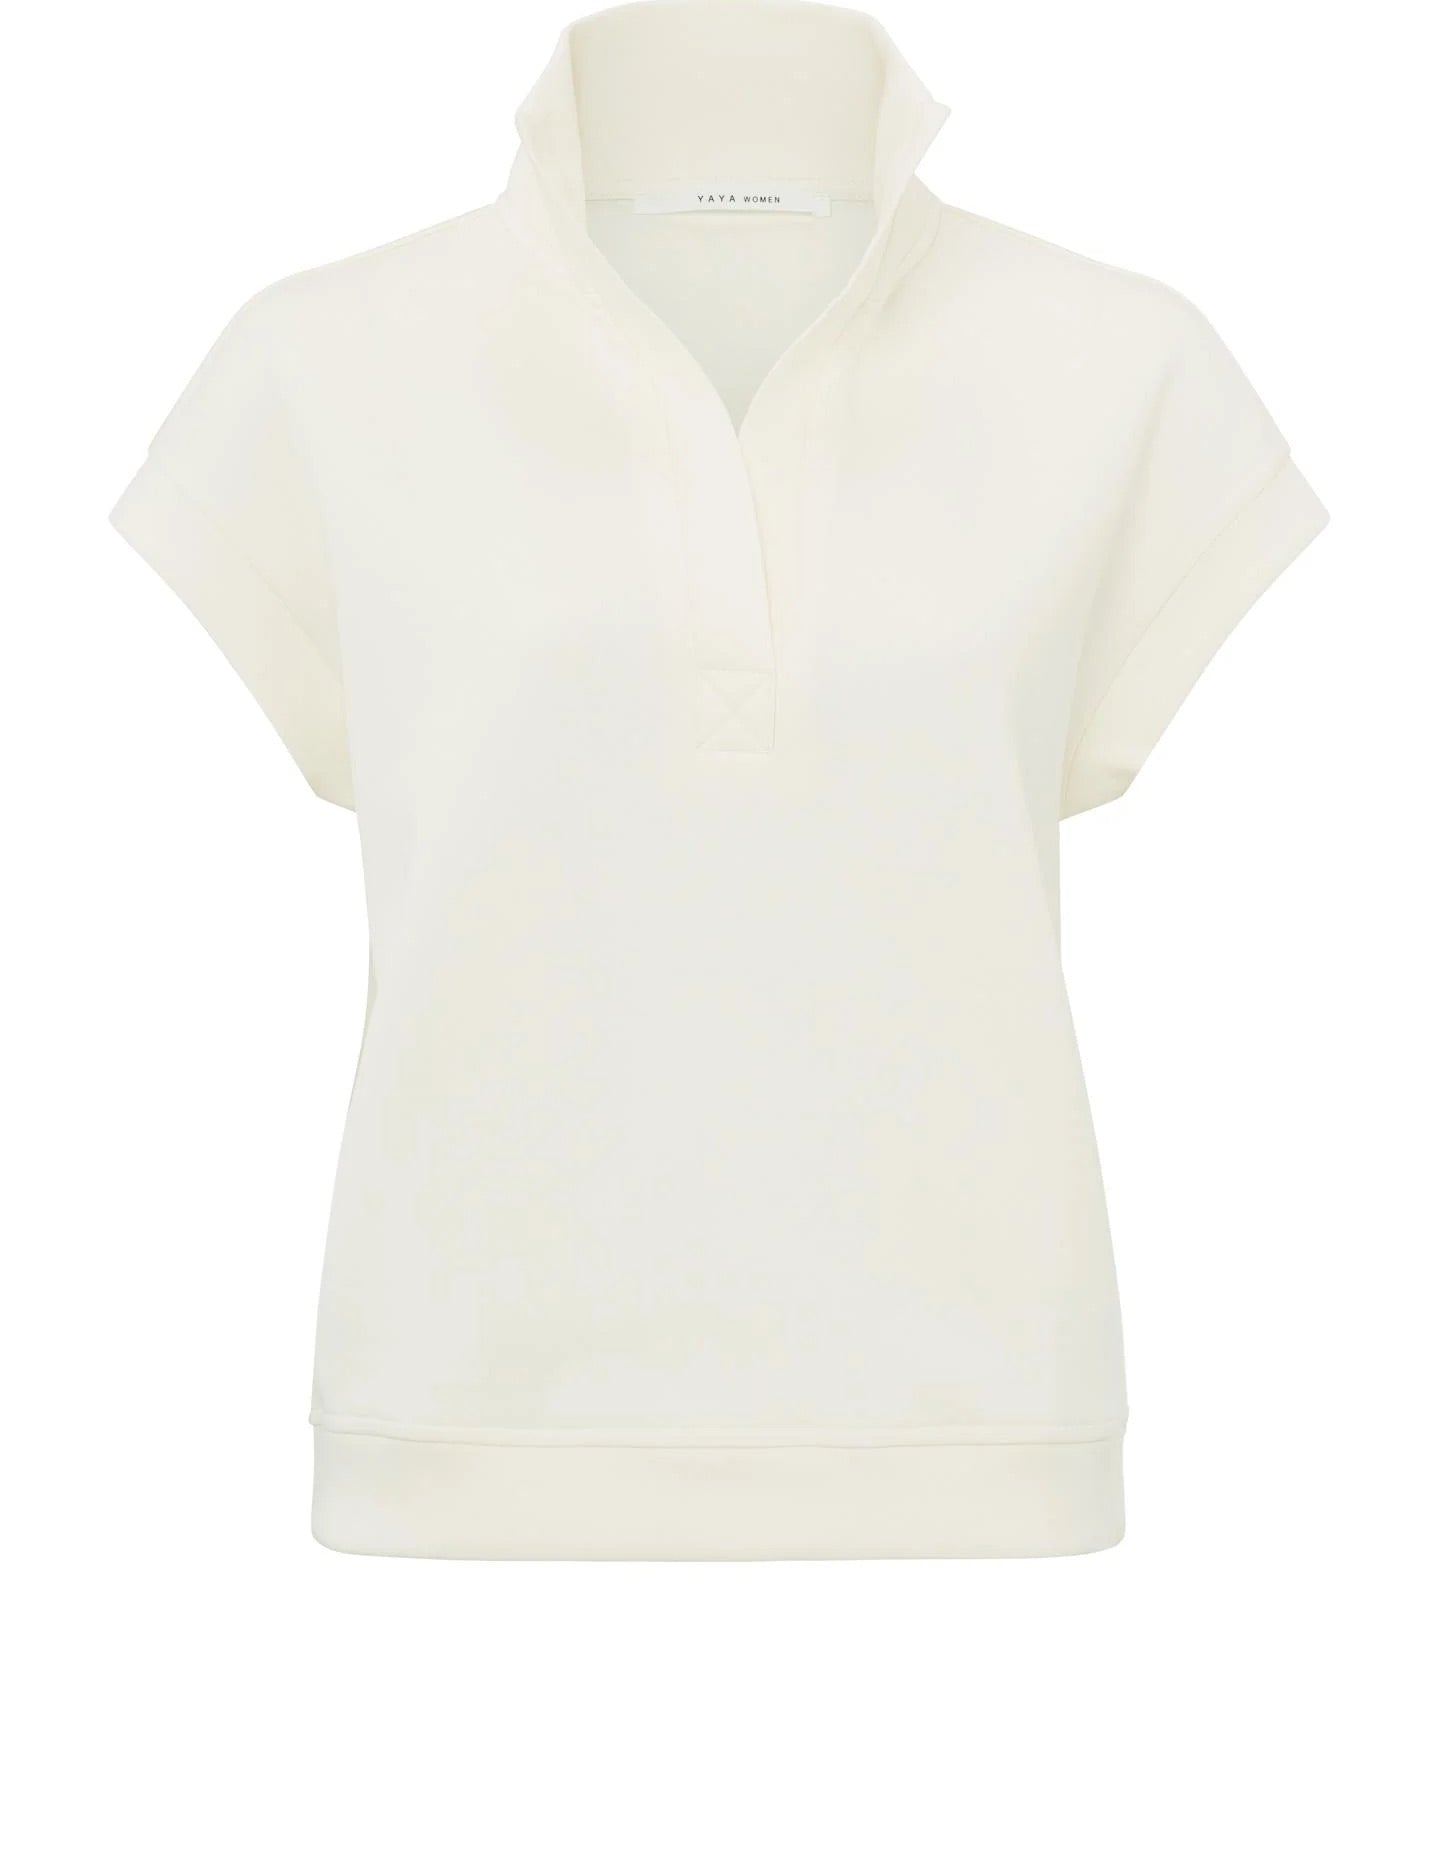 sweatshirt-with-polo-collar-and-short-sleeves-in-regular-fit-ivory-white_1eaac871-a020-4e2e-ae96-e2d945afb695_2880x_jpg.jpg